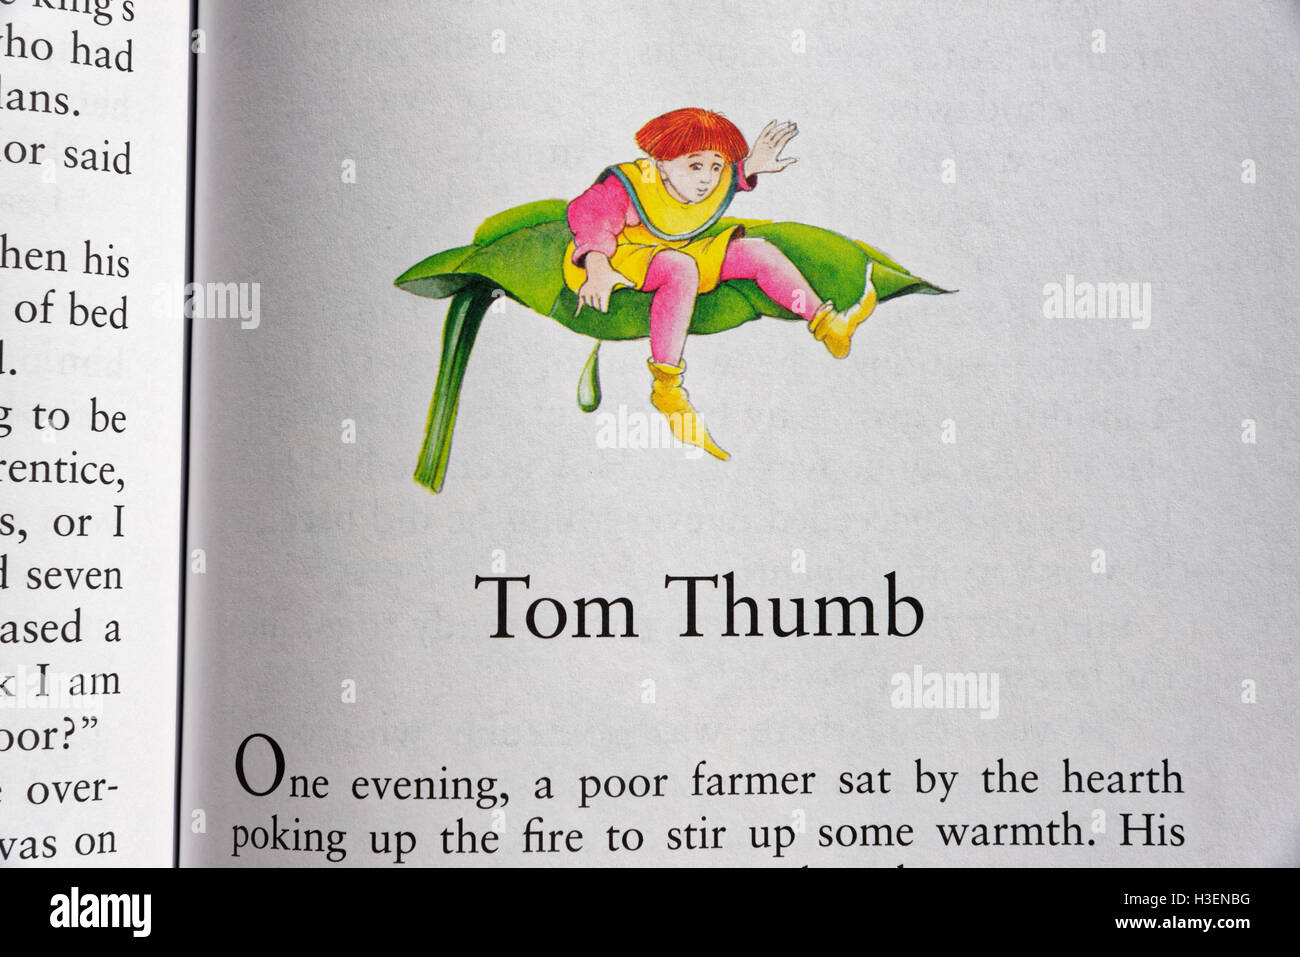 Tom Thumb in a book of Fairy Tales Stock Photo - Alamy